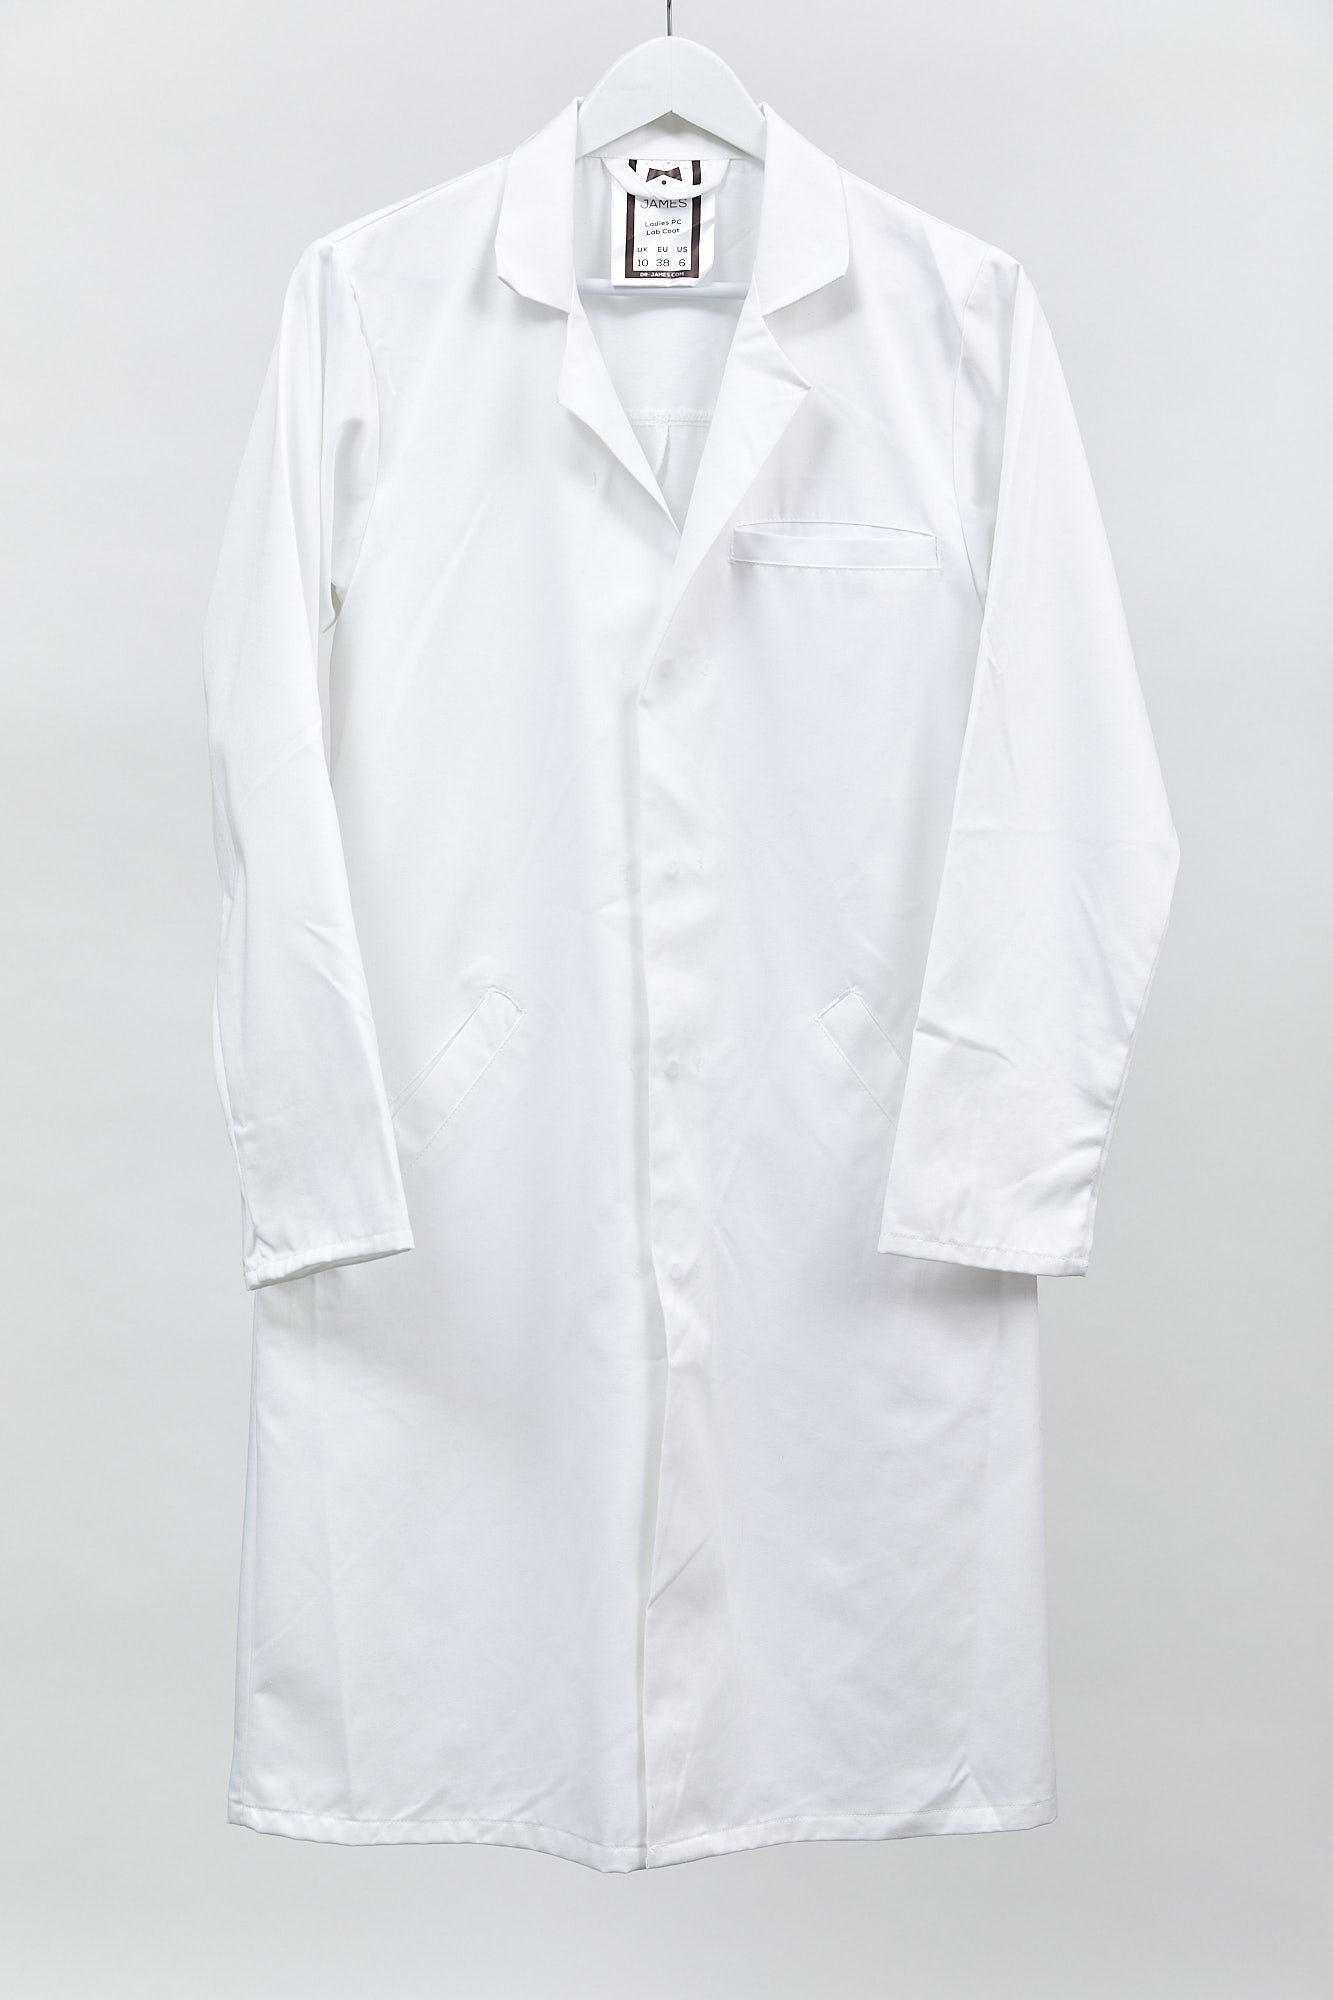 Womens White Medical Lab Coat: Size Small